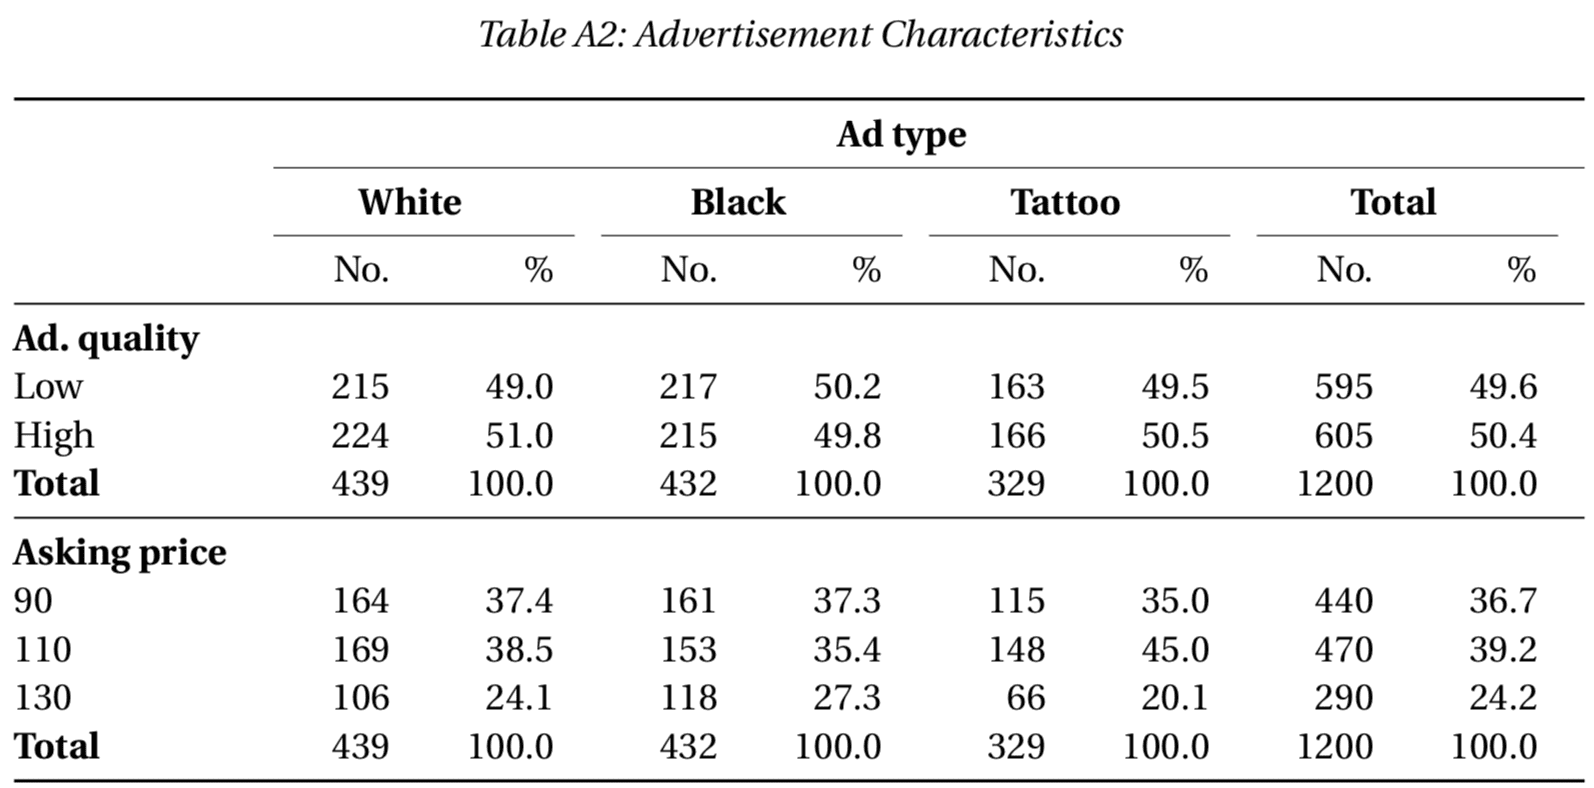 Table A2 from Doleac and Stein (2013)